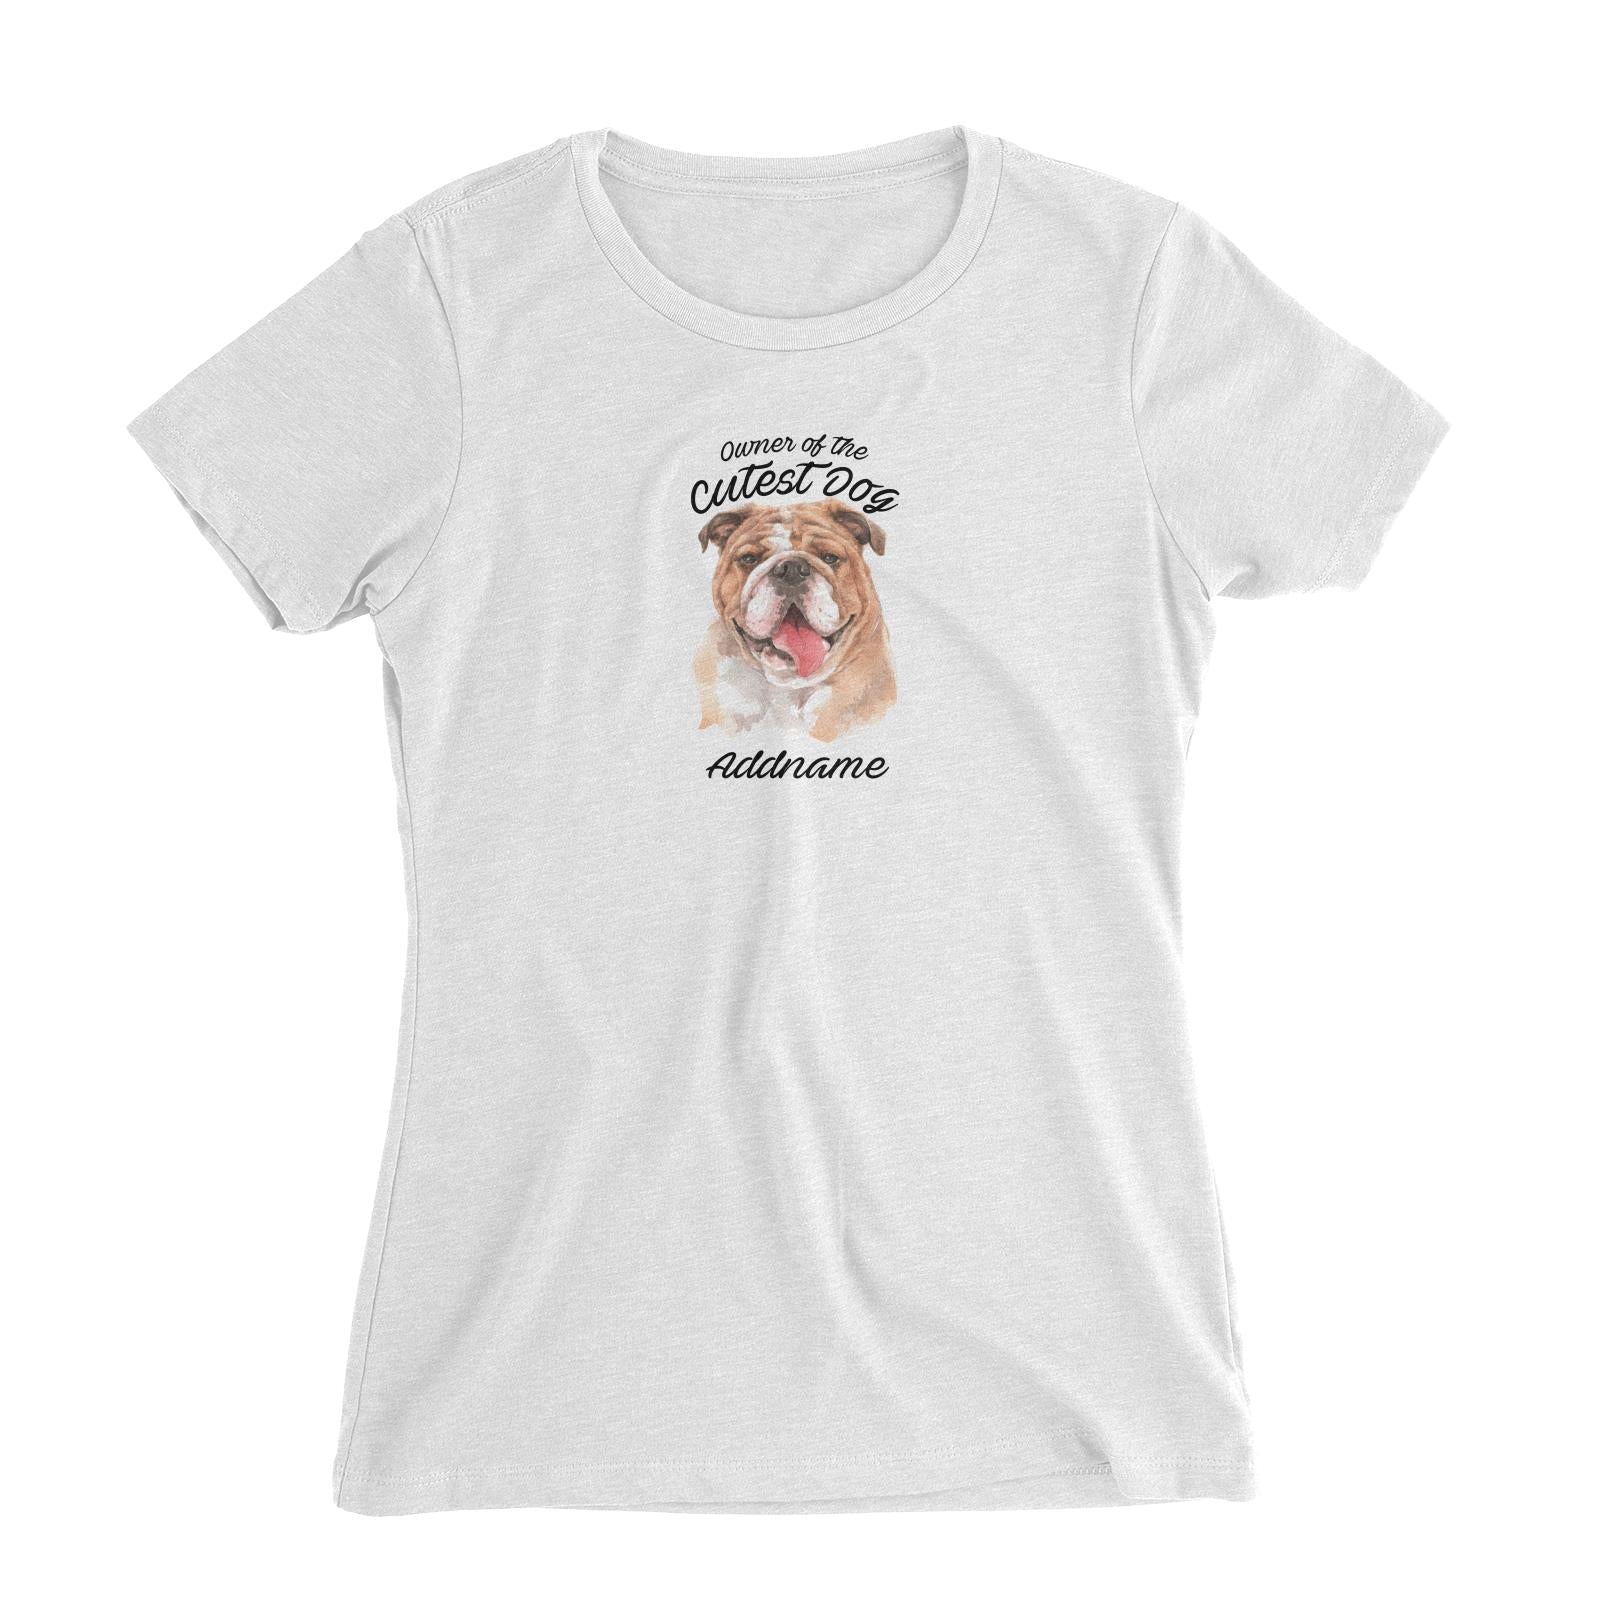 Watercolor Dog Owner Of The Cutest Dog Bulldog Addname Women's Slim Fit T-Shirt